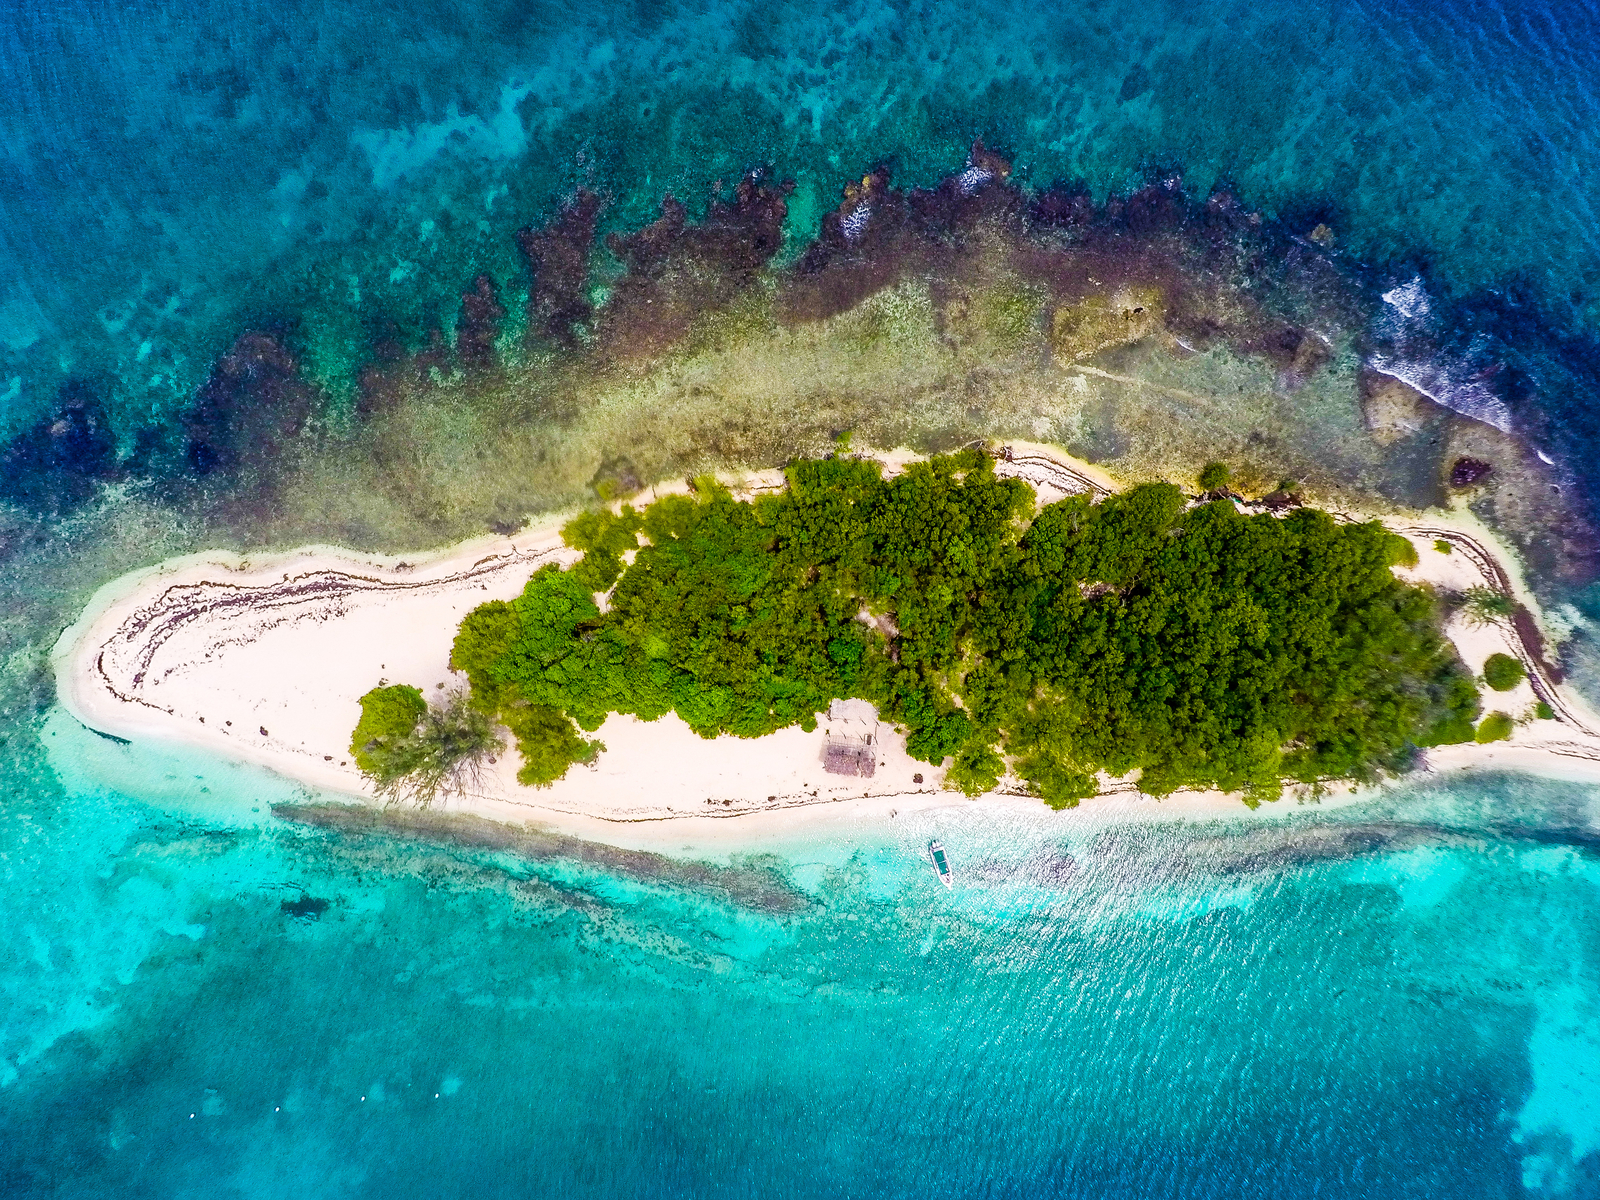 Lime Cay Beach, one of the best beaches in Jamaica, as seen from above